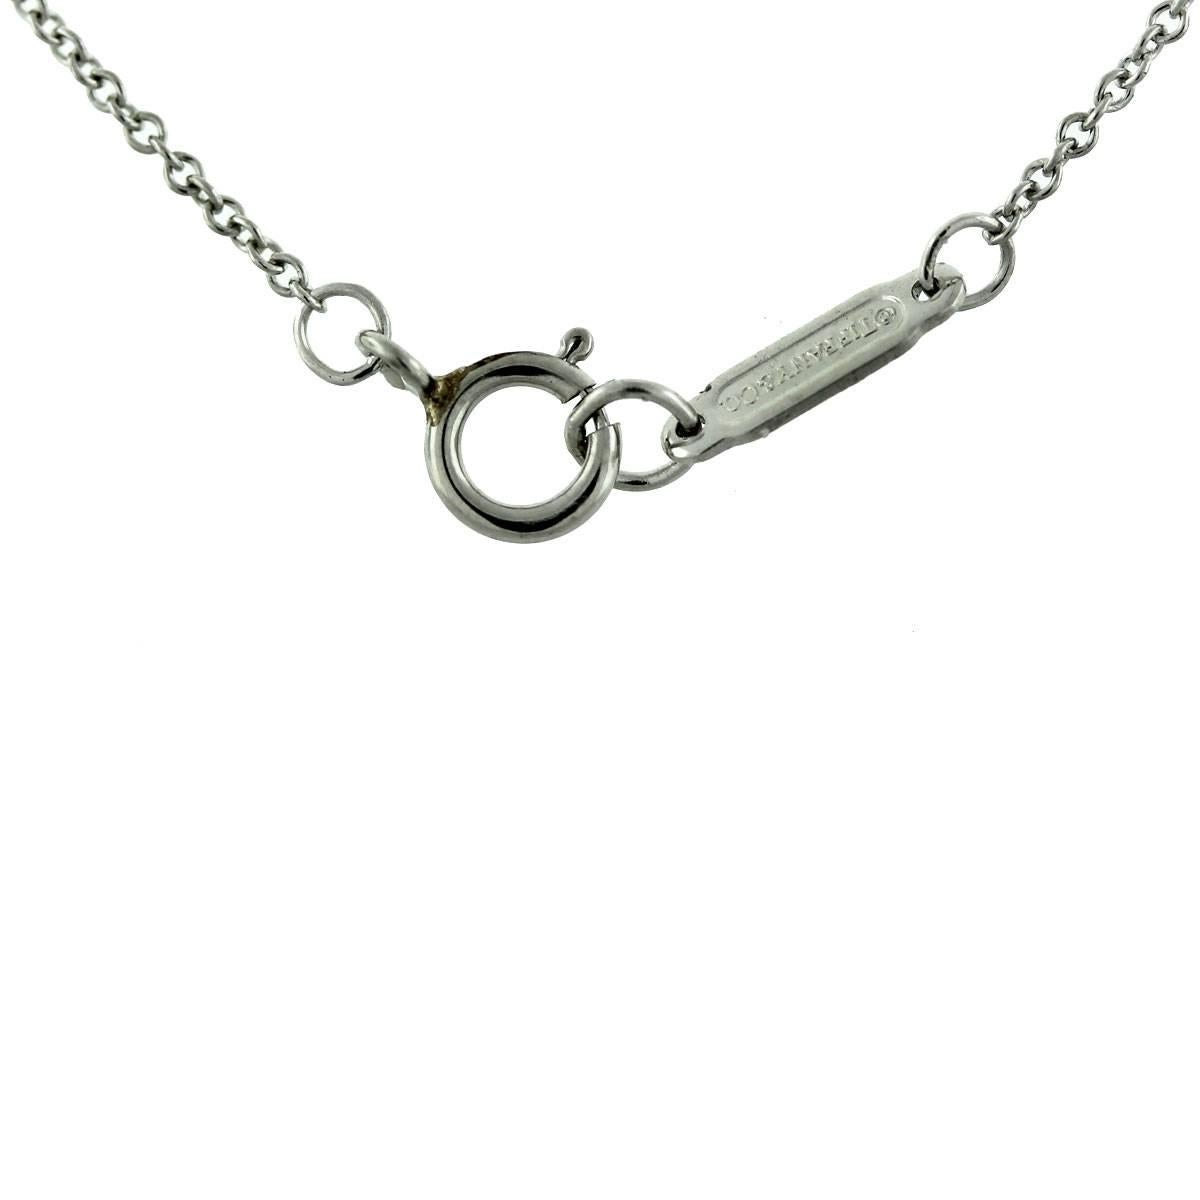 Designer: Tiffany & Co.
Collection: Legacy
Metal: Platinum
Diamond Details: Approx. .59ctw
Diamond Color: G/H
Diamond Clarity: VS
Pendant Size: 20mm in Height x 8mm in Width x 3mm Thick
Total Item Weight: 2.8dwt (4.4g)
Necklace Details: Rolo Chain